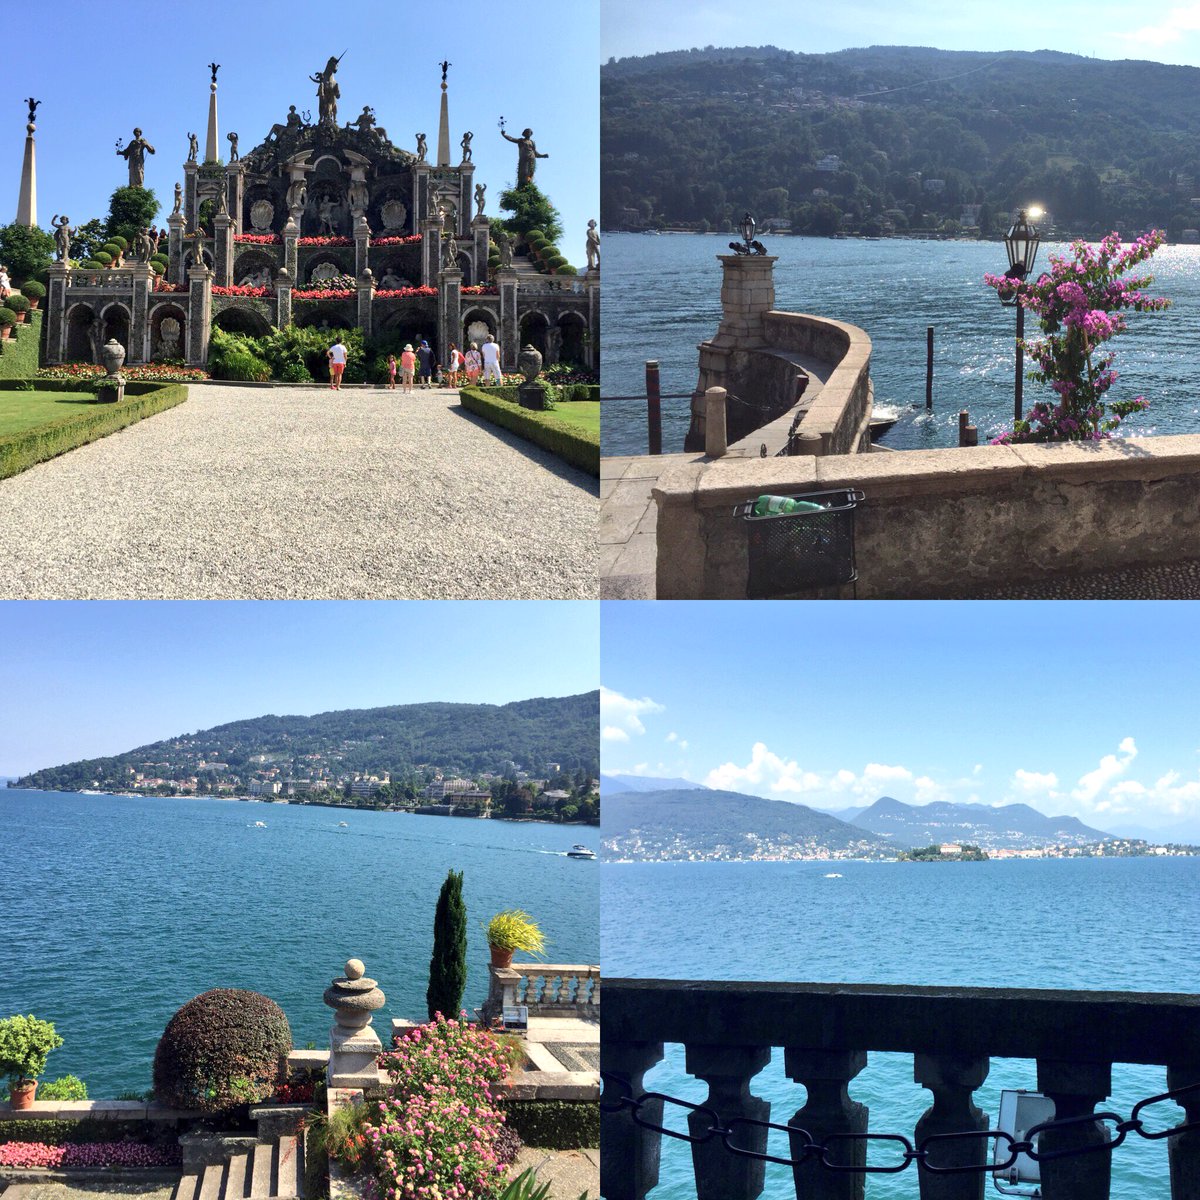 Trip from #stresa to visit the #borromean islands of #isolapescatori #isolamadre and #isolabella including the magnificent palace and gardens at #palazzoborromeo